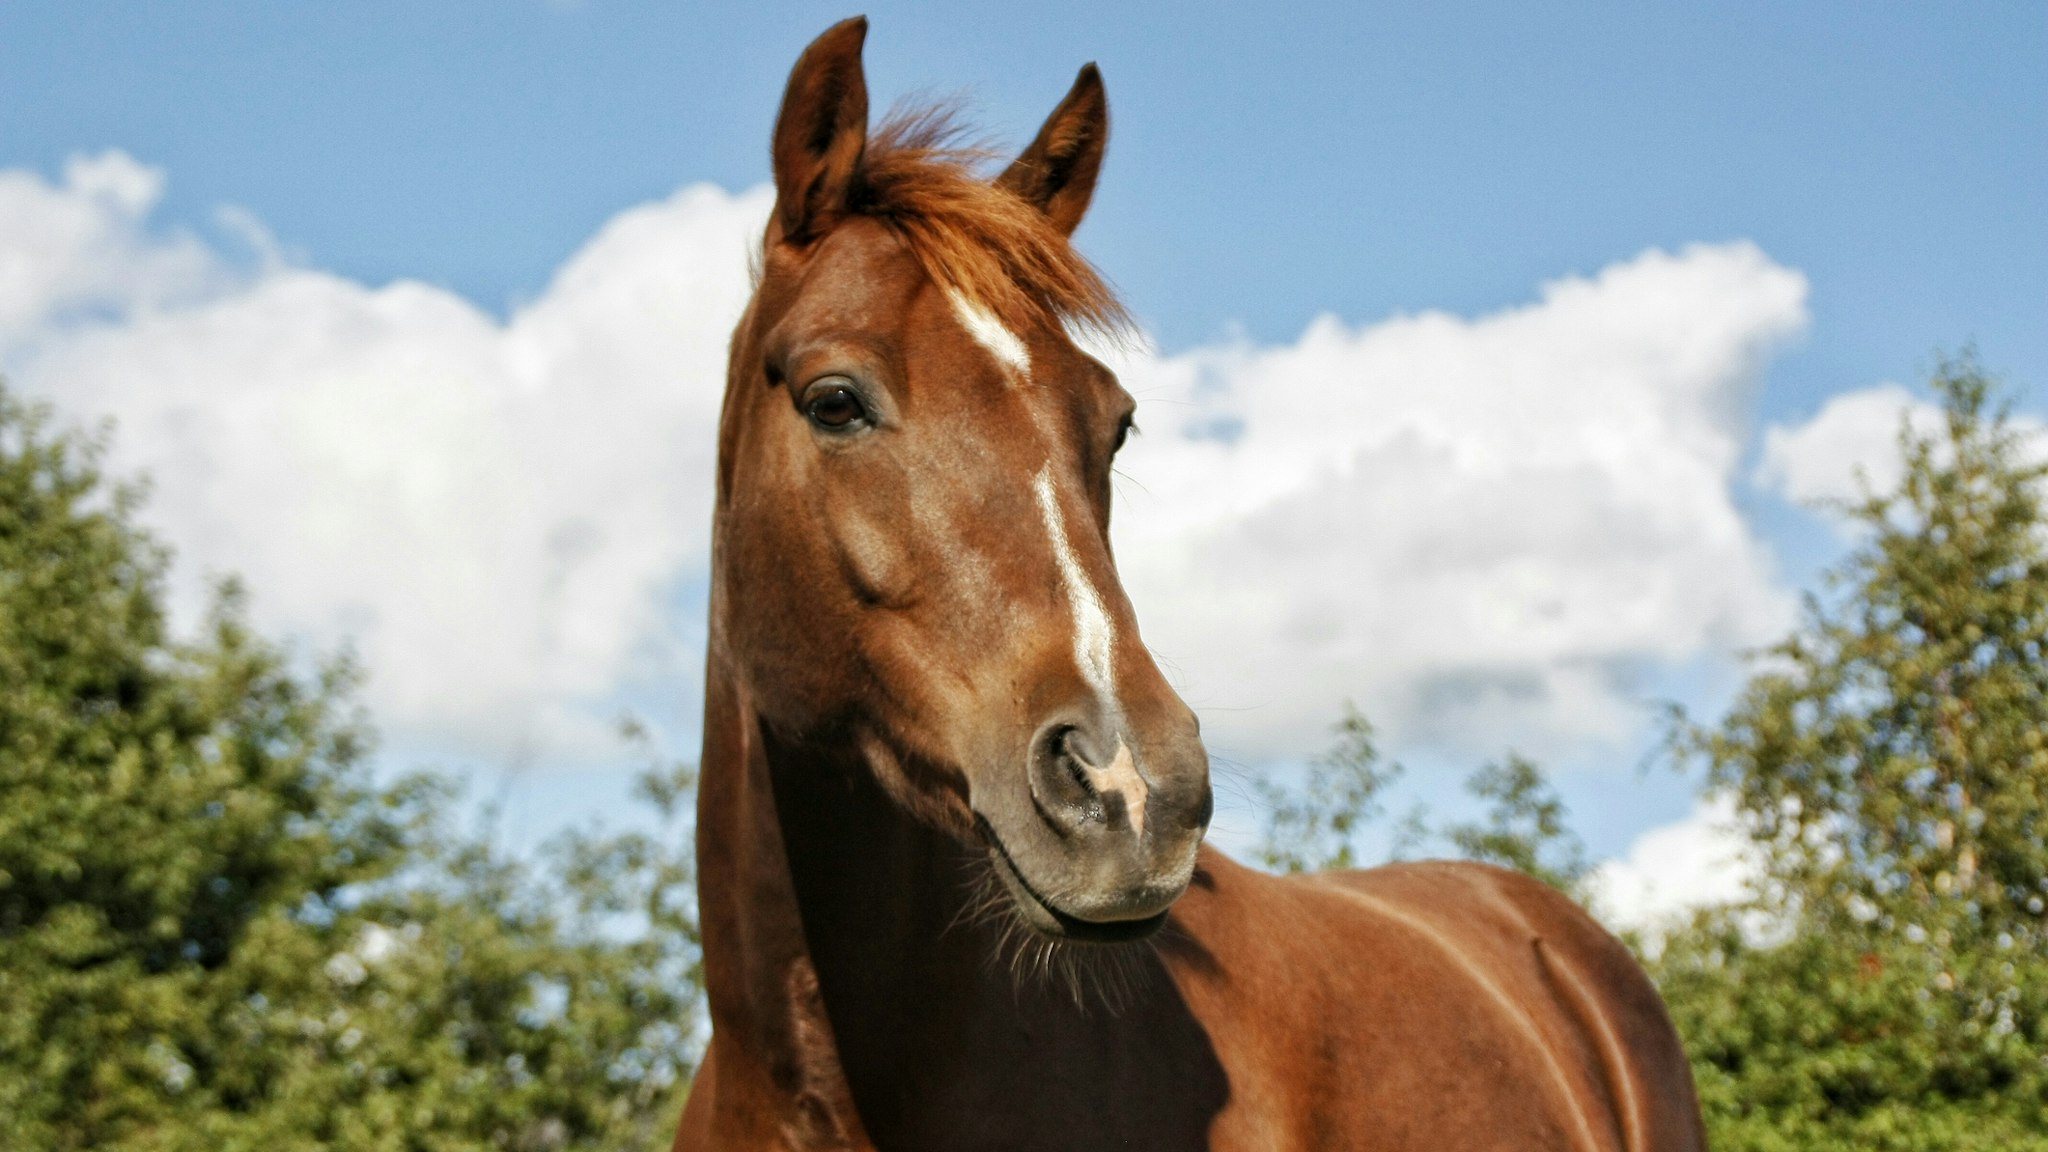 Close-Up Of Horse Against Blue Sky - stock photo